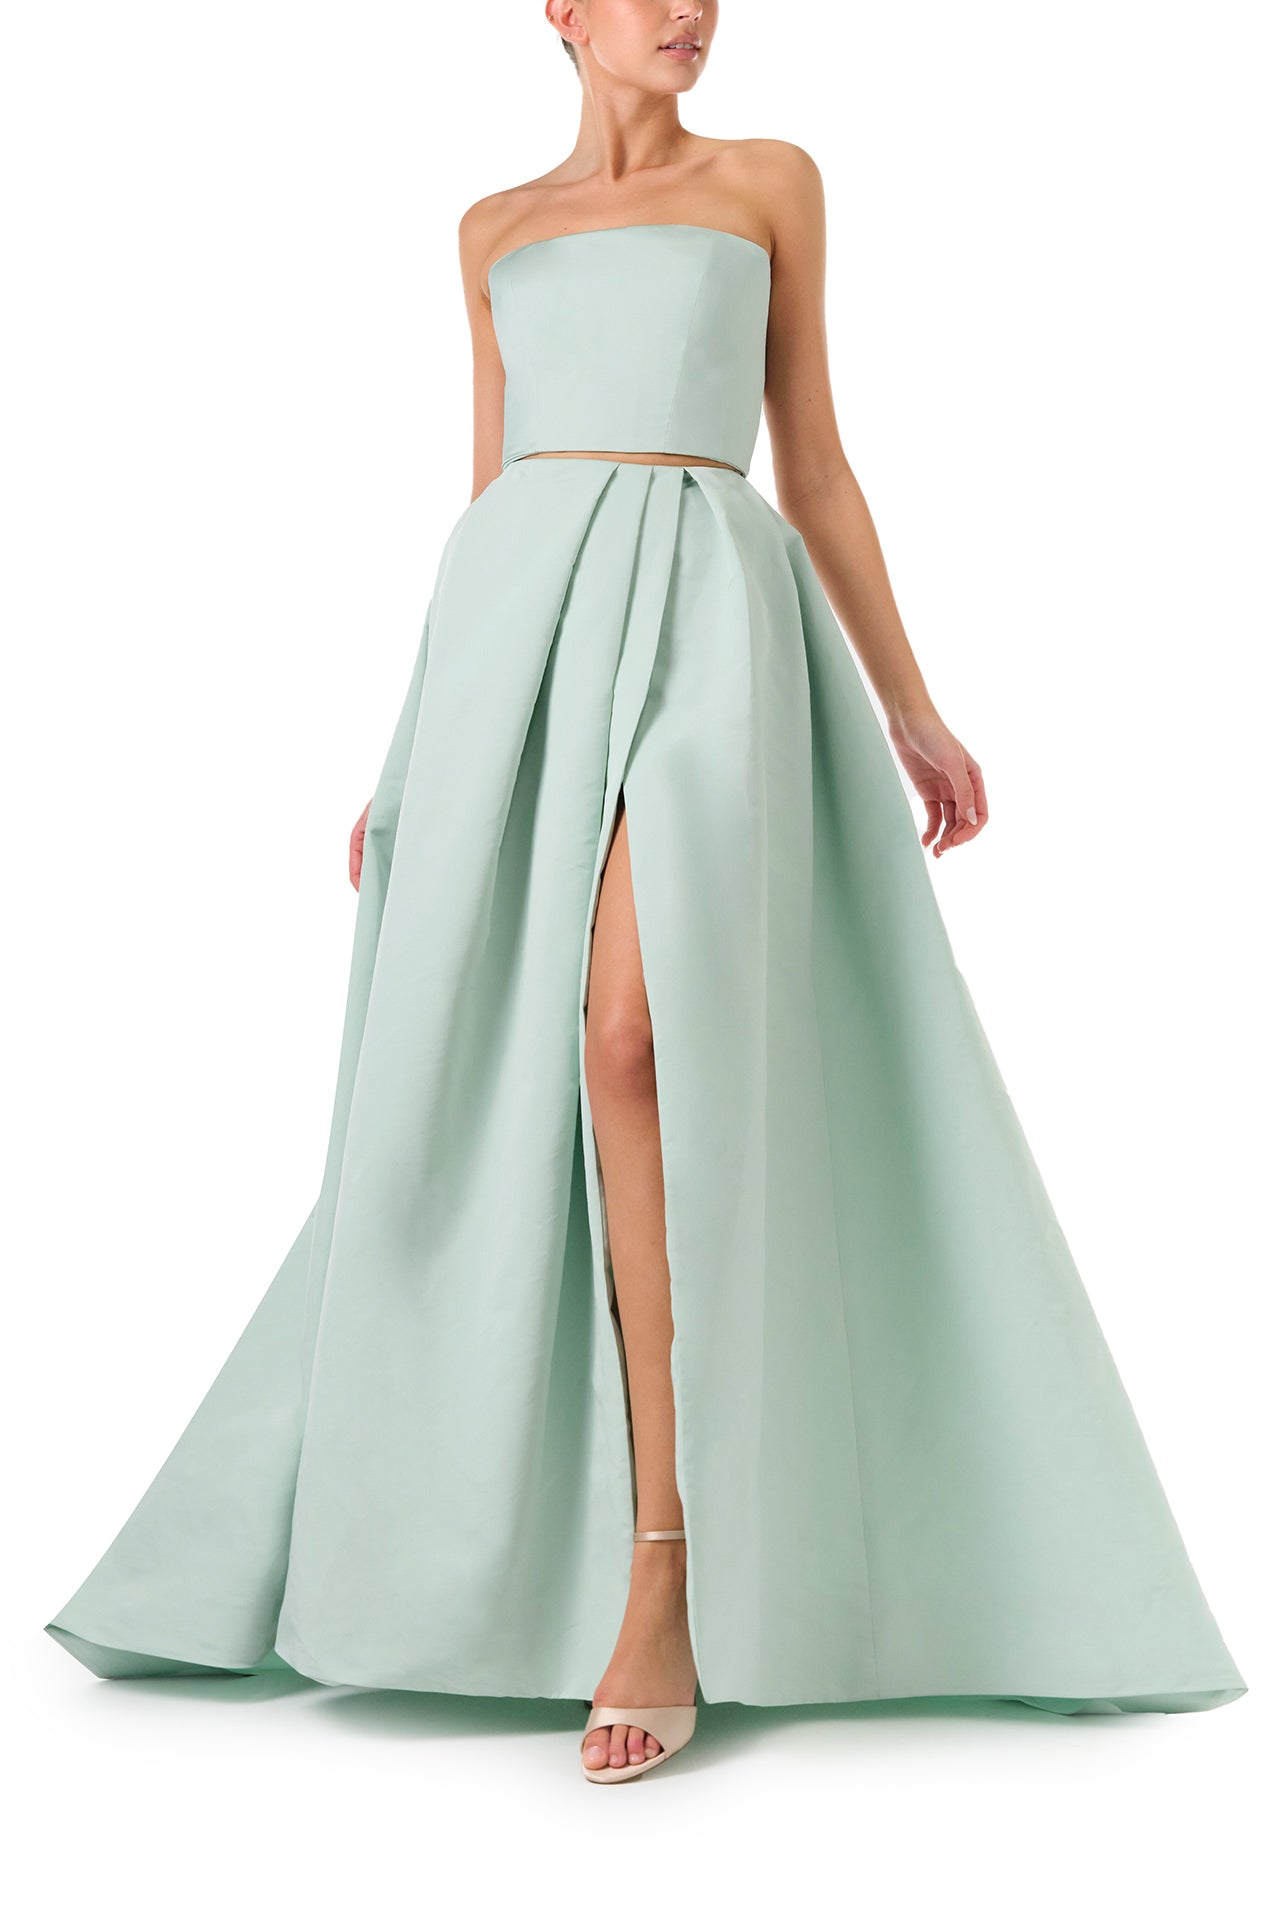 Monique Lhuillier Spring 2023 ball skirt with front slit in pistachio silk faille fabric - front with slit.